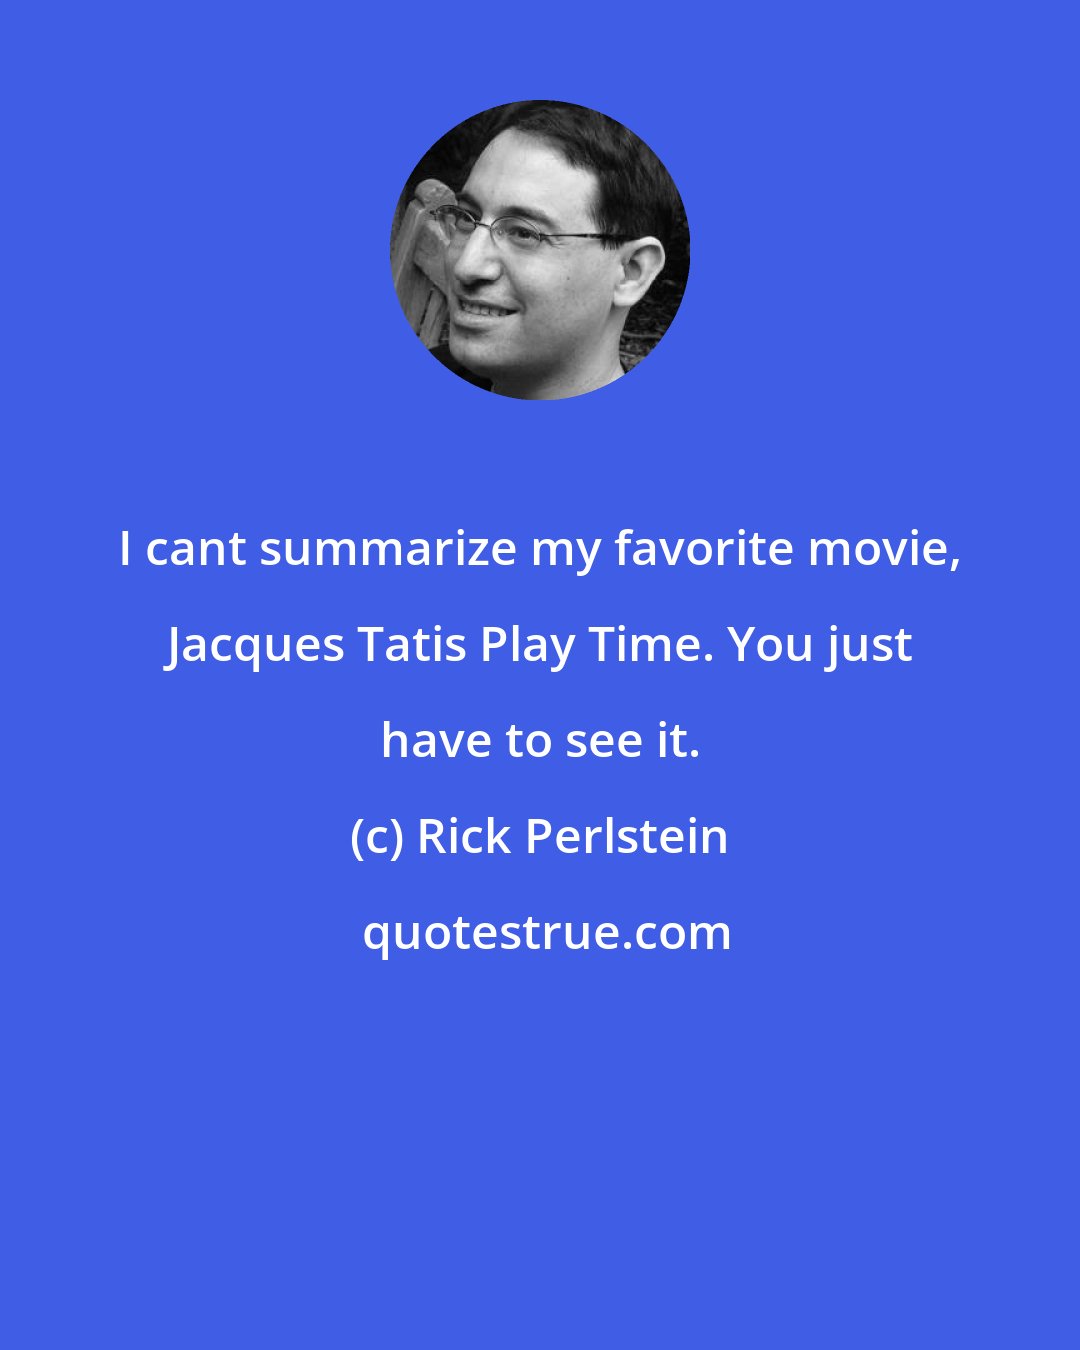 Rick Perlstein: I cant summarize my favorite movie, Jacques Tatis Play Time. You just have to see it.